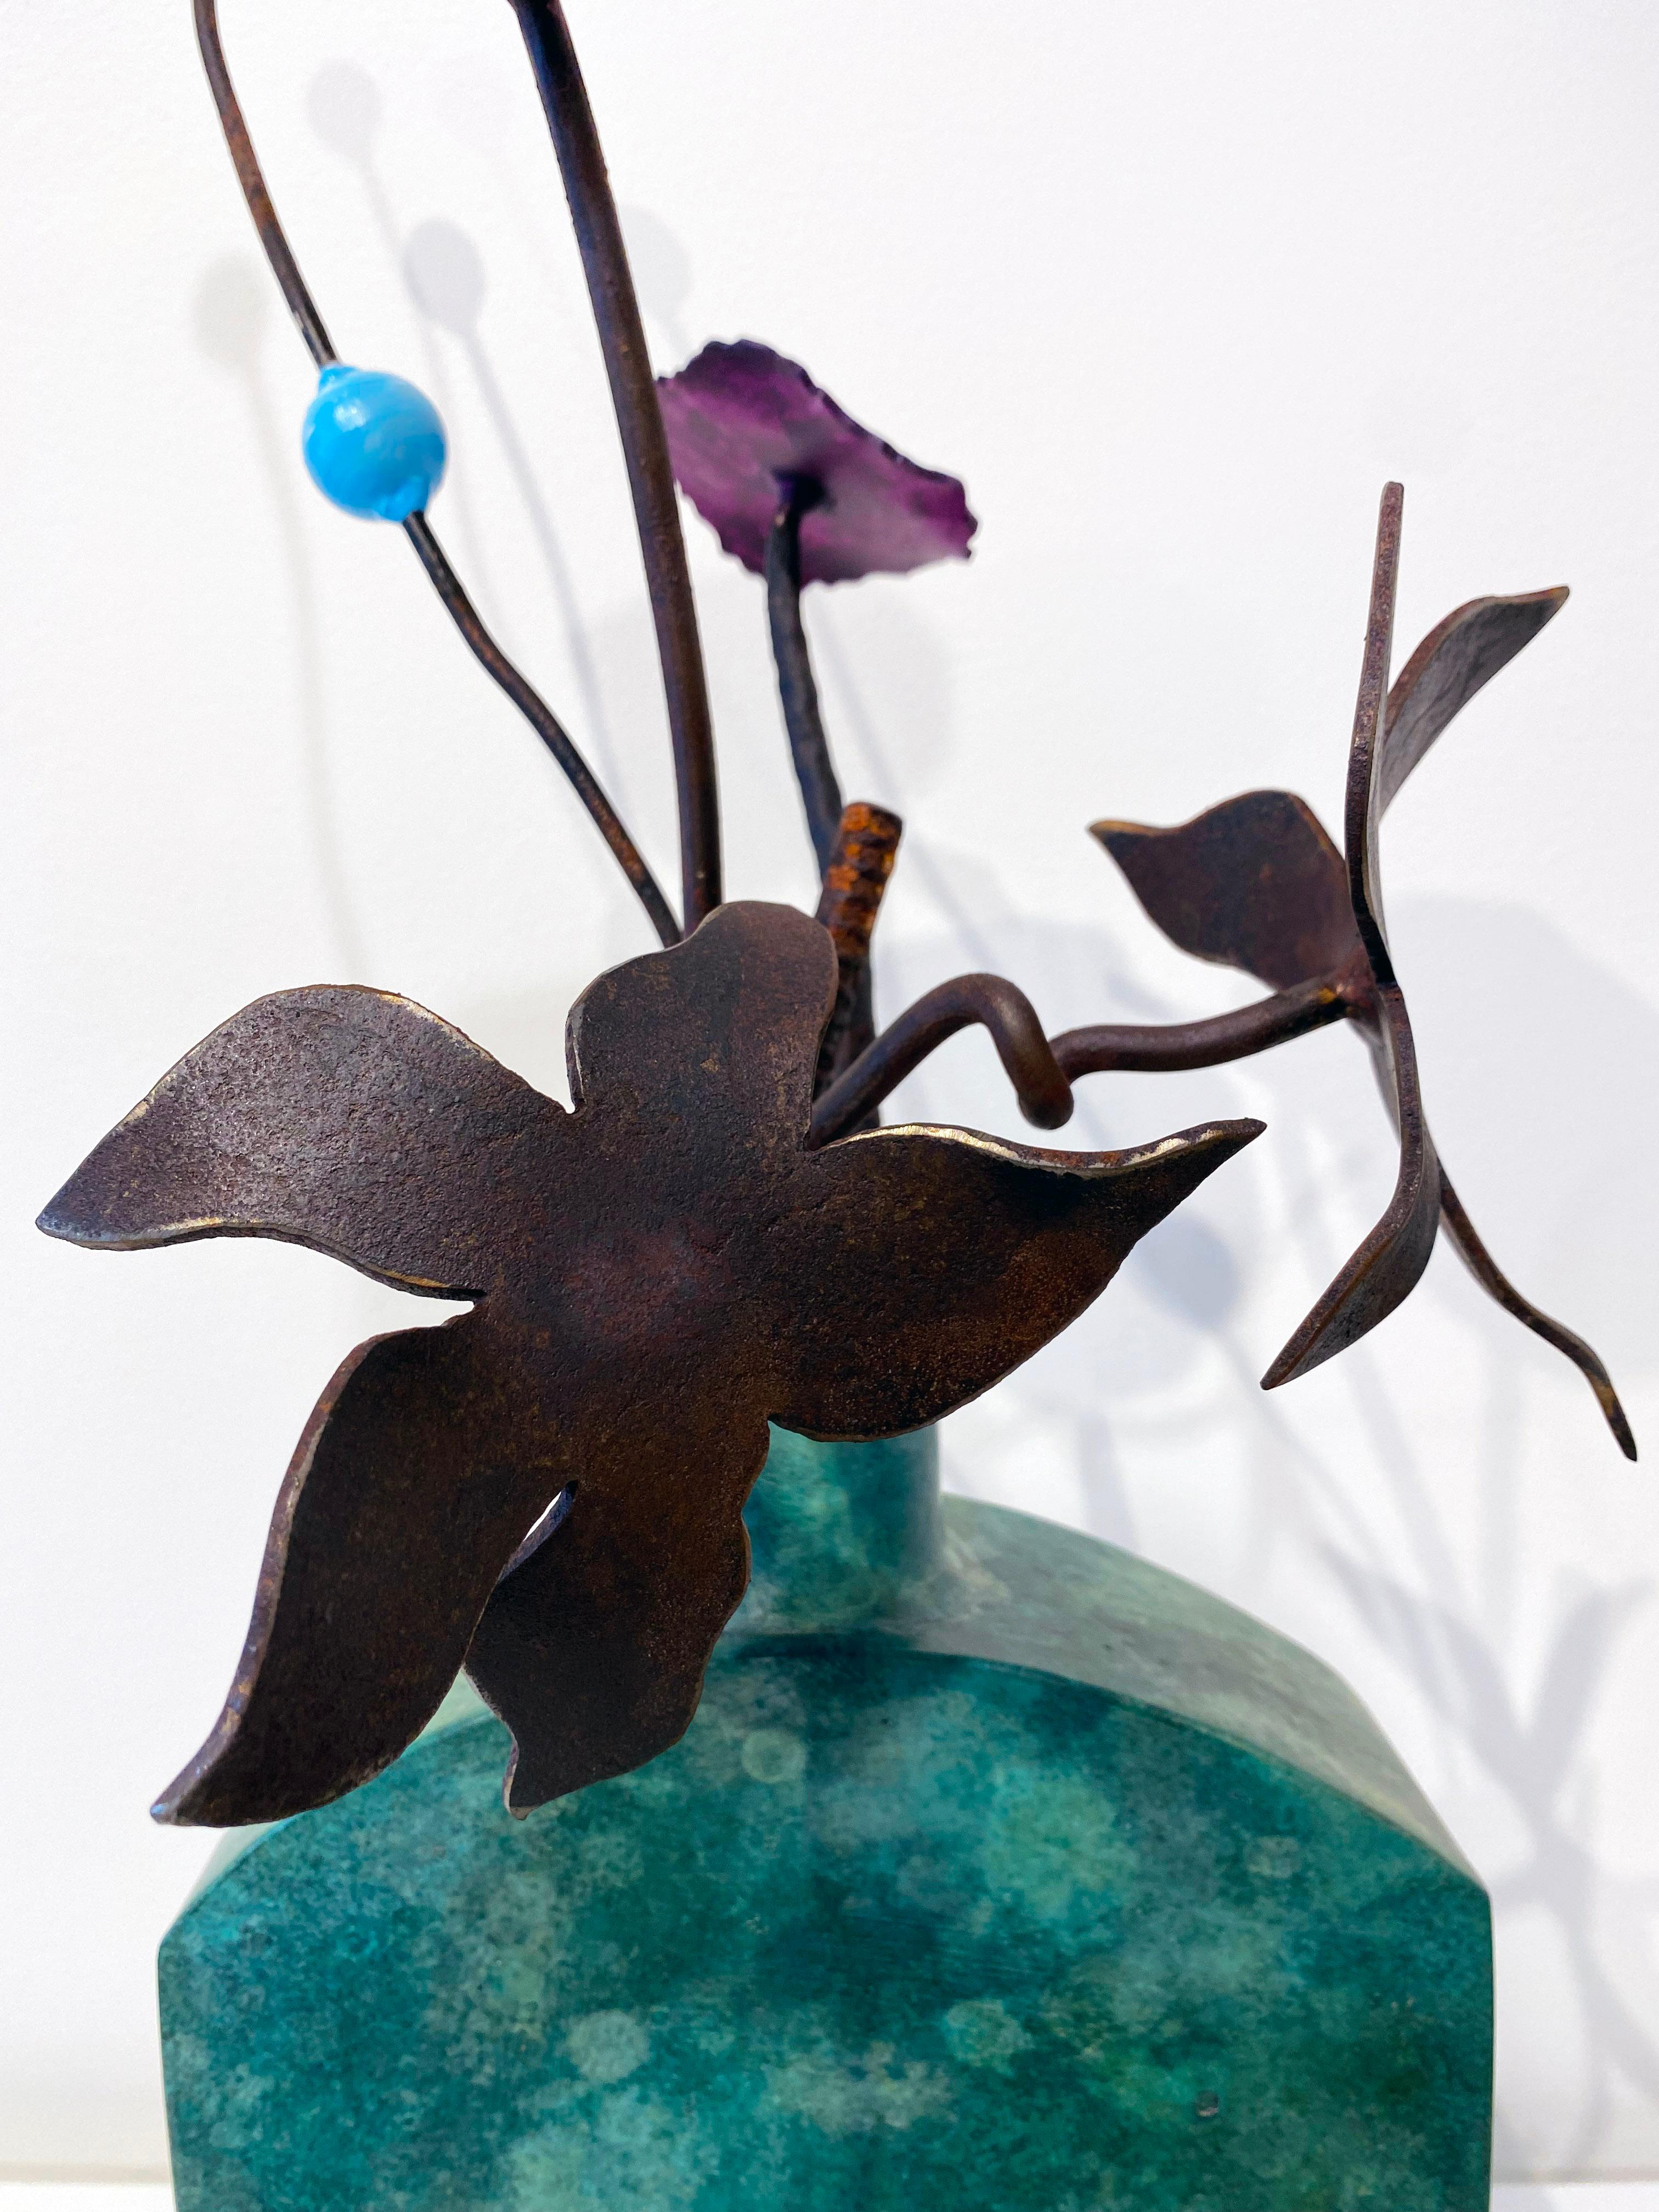 Bronze and Steel Sculpture by David Kimball Anderson 'Green Bottle Summer' 5